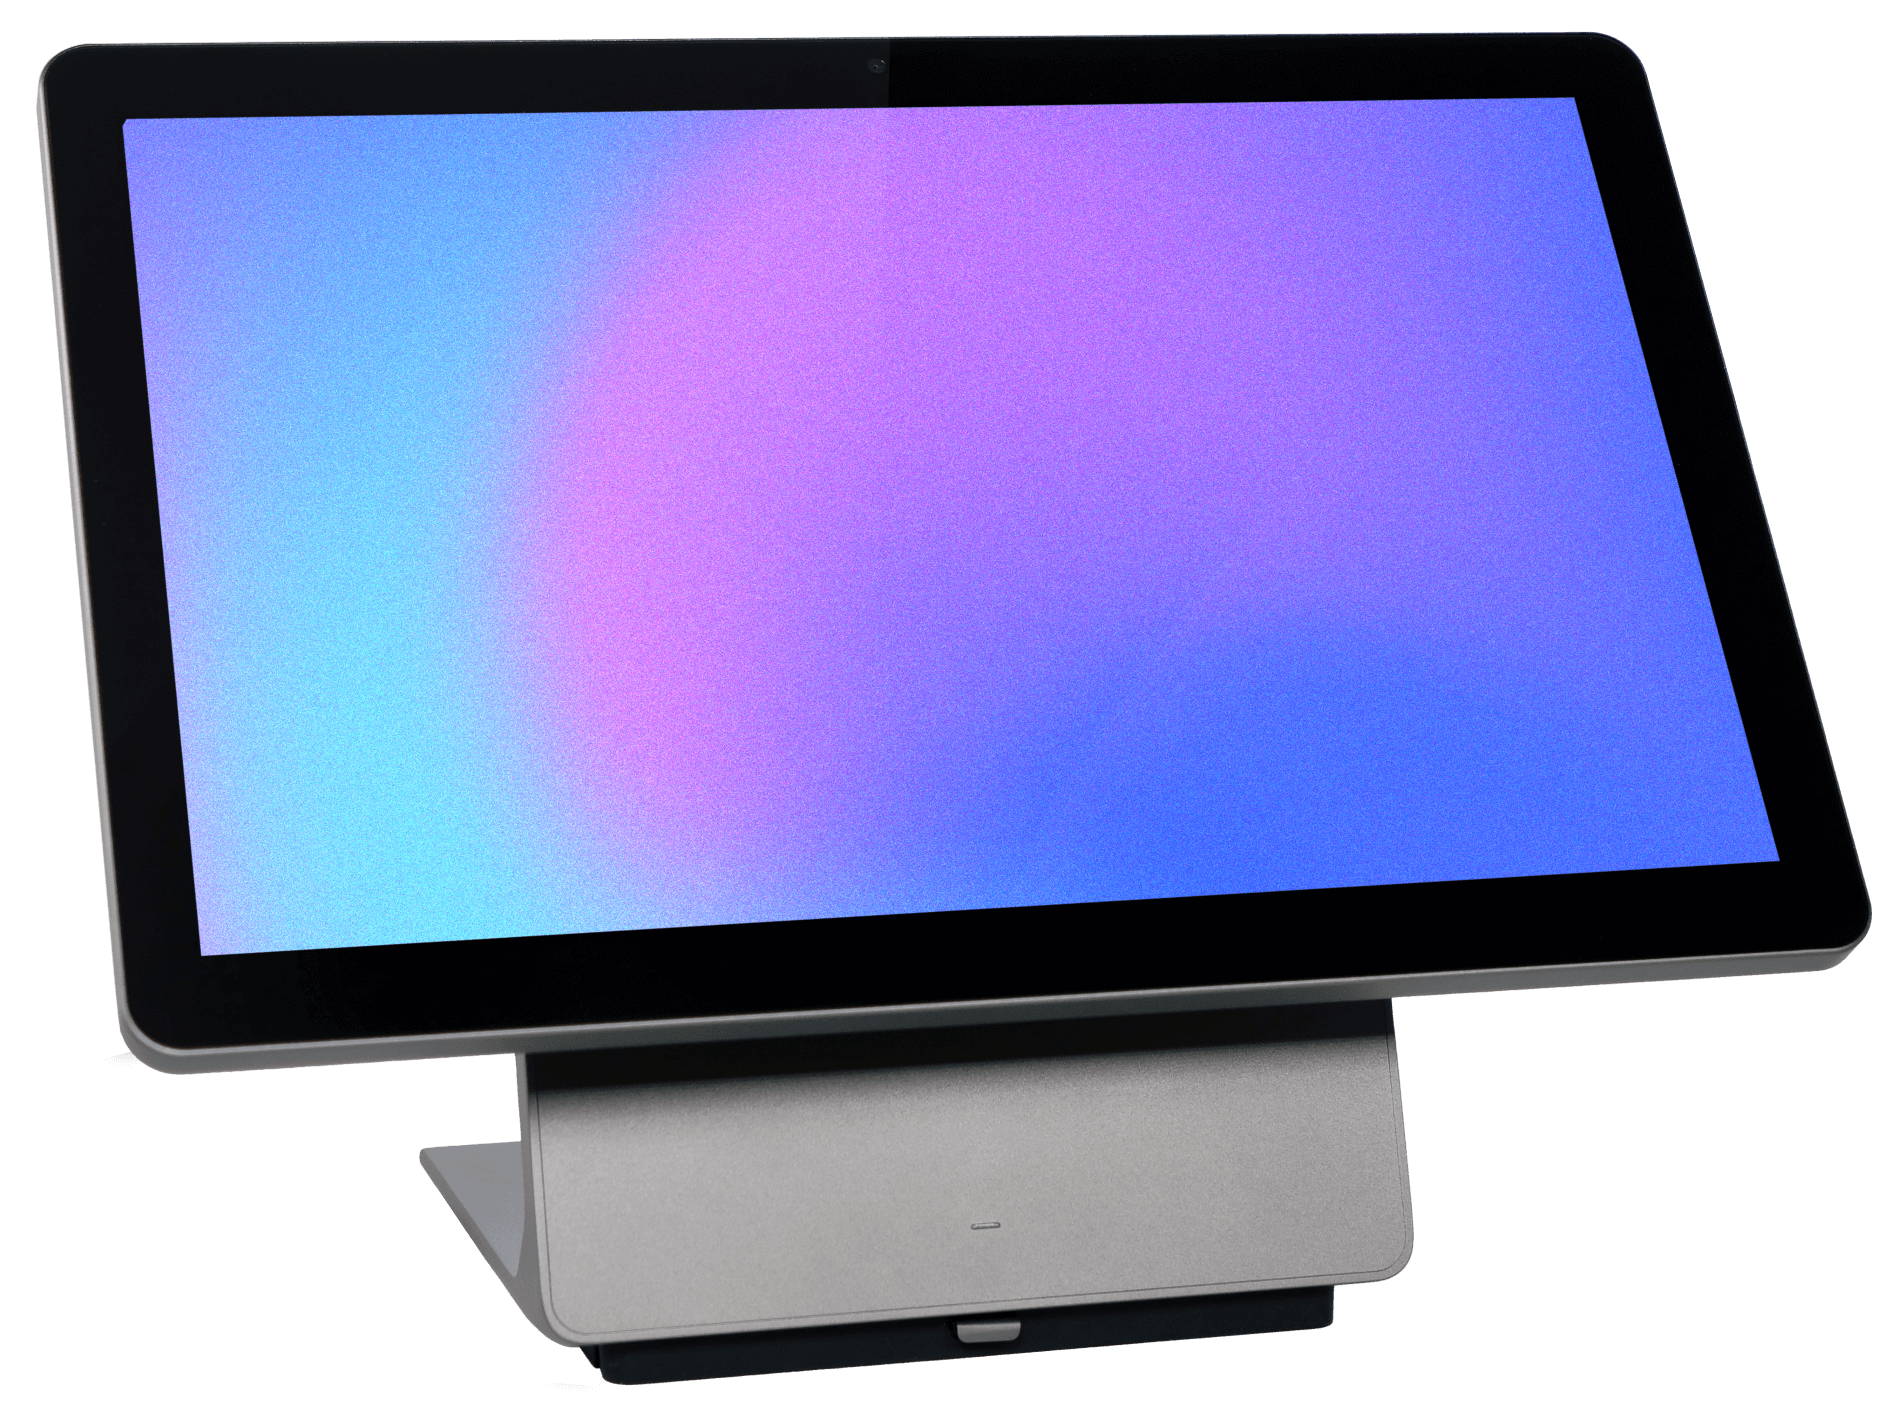 Close up of workstation with a blue and purple gradient screen saver. The device is angled to the right